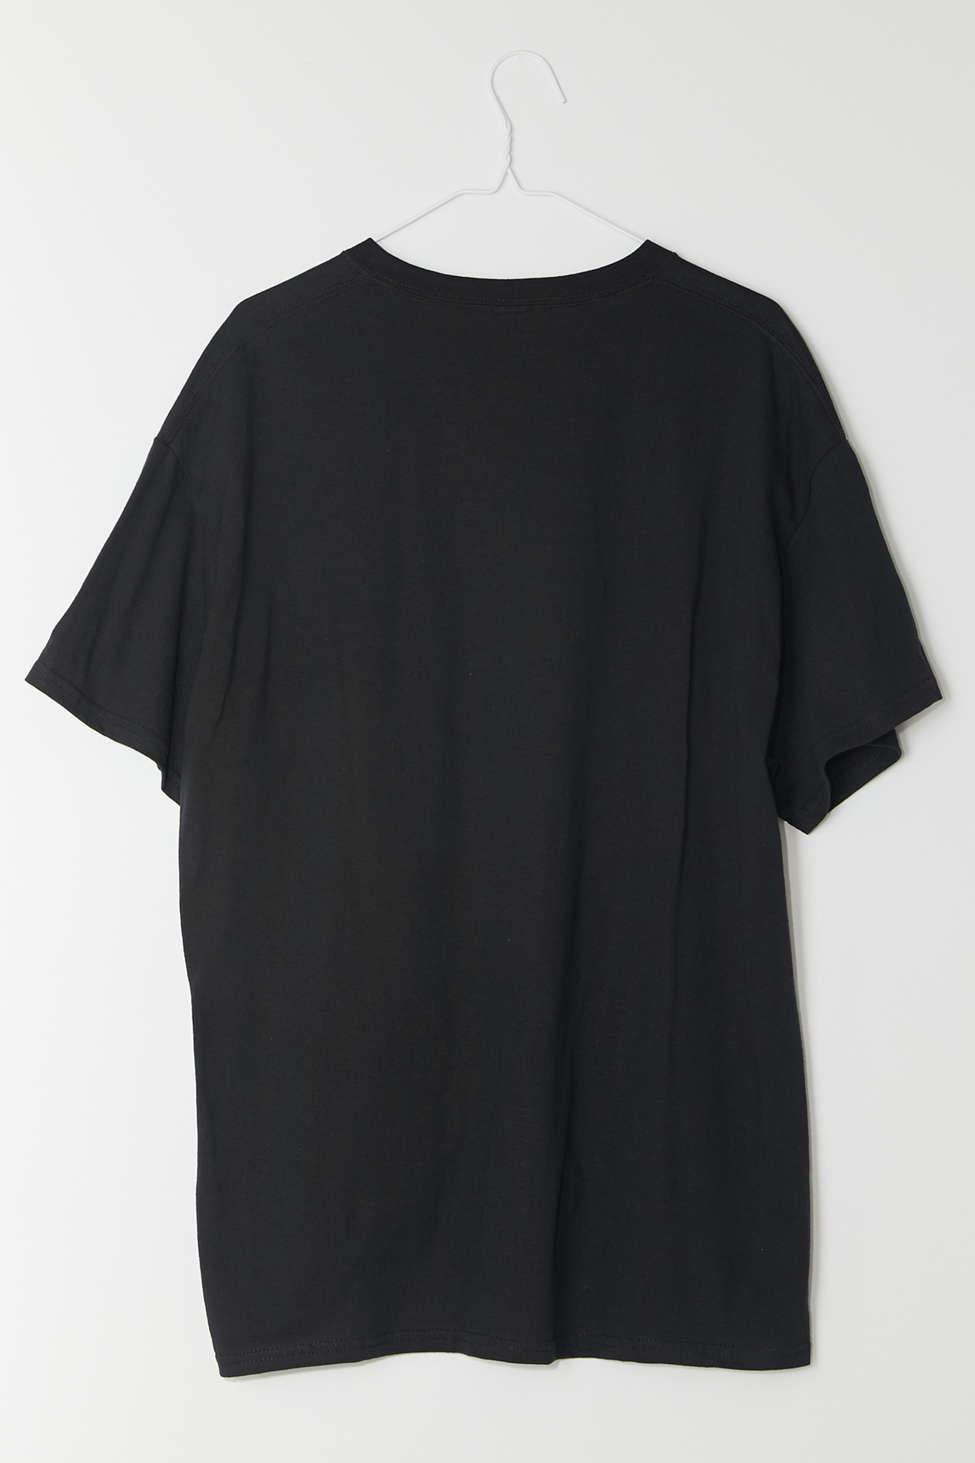 Urban Outfitters The Craft Photo T-shirt Dress in Black - Lyst